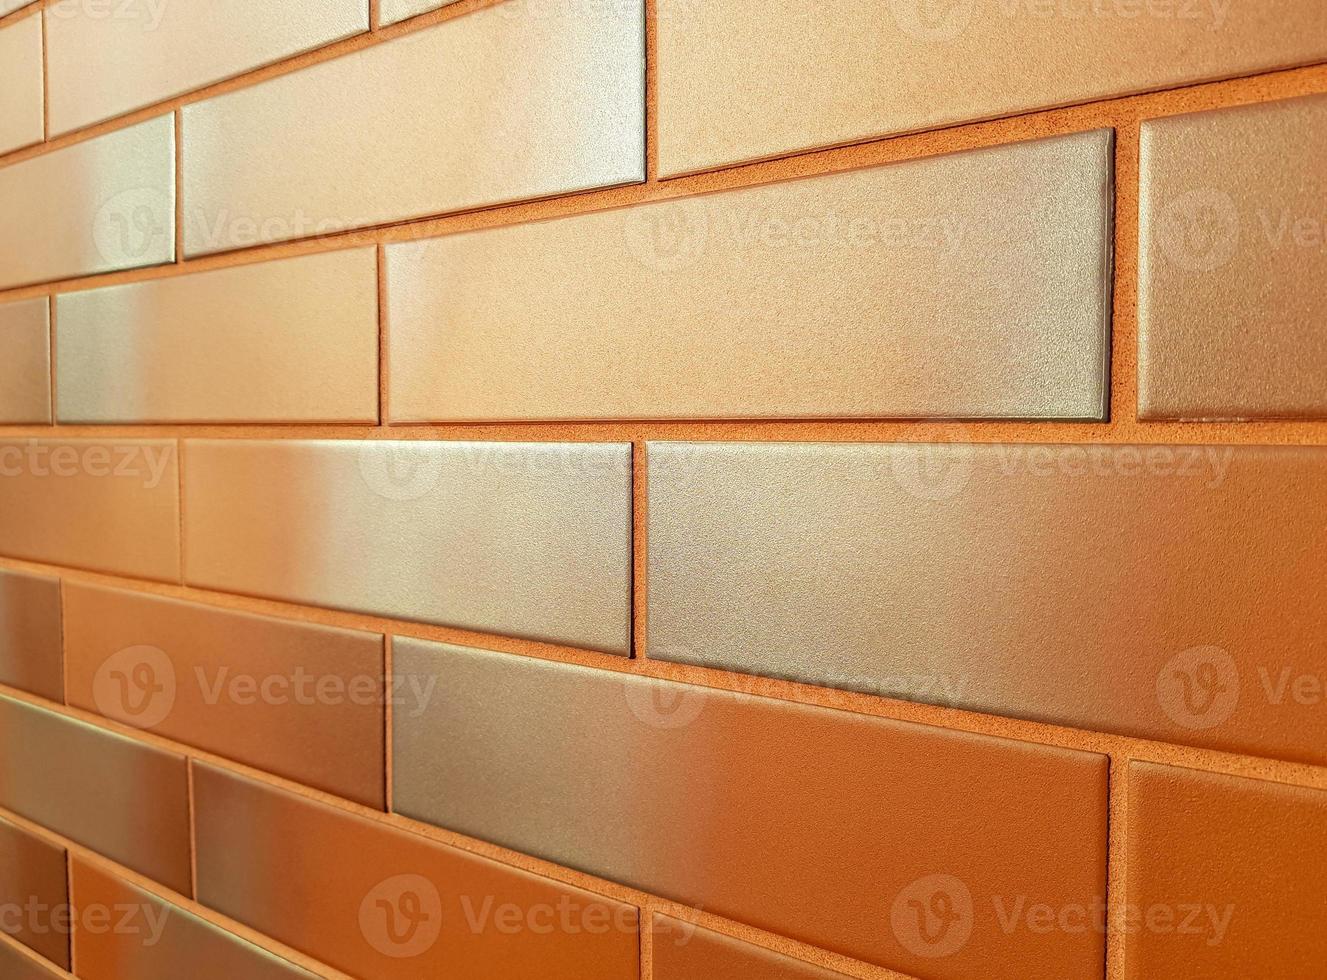 Modern facade made of orange ceramic tiles. New wall tiled bright orange bricks with a silvery gray shade, shining in the sun. Horizontal perspective receding into the distance. Background copy space. photo